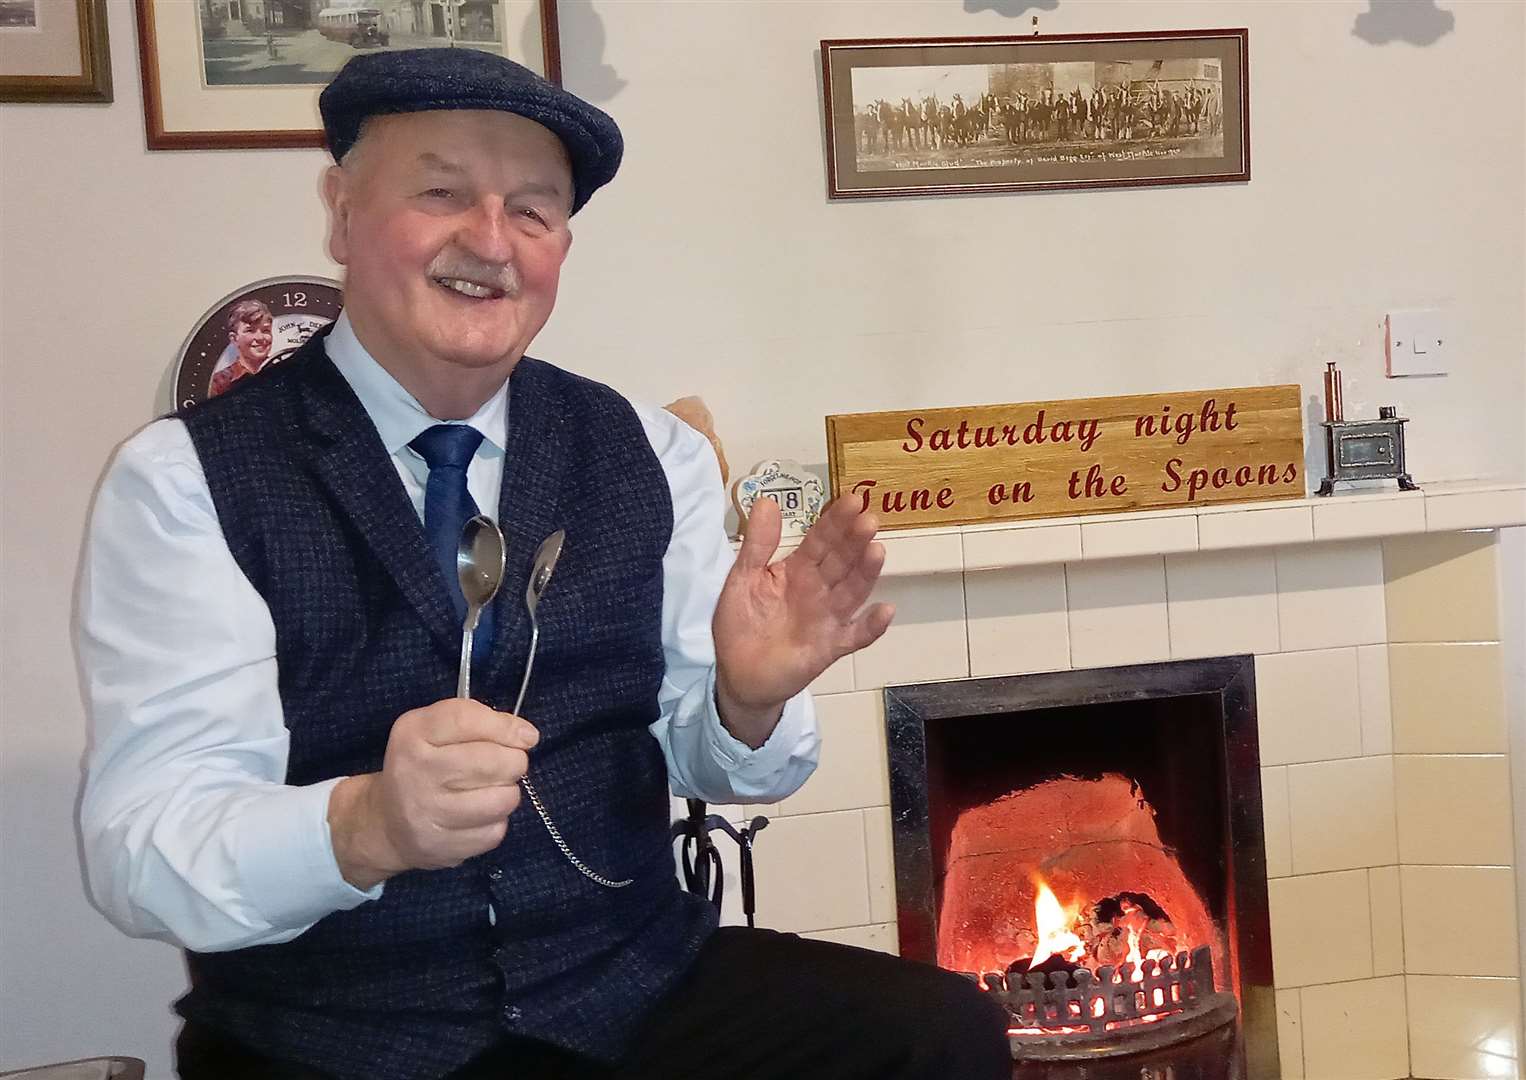 Willie Mackay on his regular Saturday night Tunes on the Spoons by the fireside in his cottage at Oldhall, Watten.